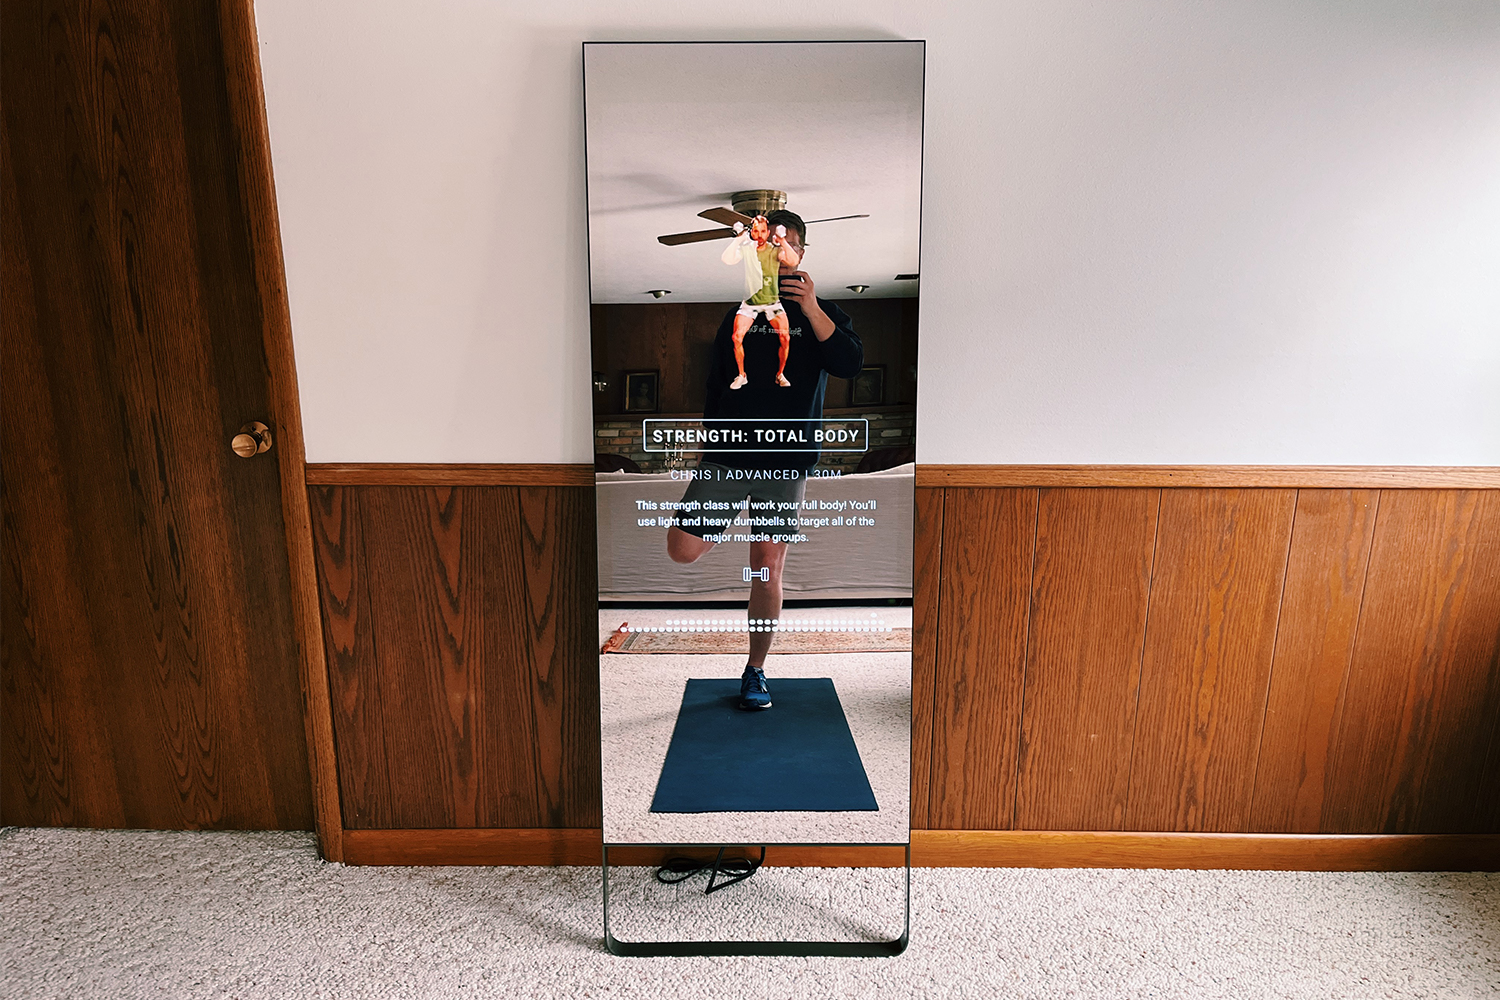 A Total  Body Mirror workout class from Chris pulled up on the exercise mirror. We reviewed the machine to see if it's a good option for working out at home.